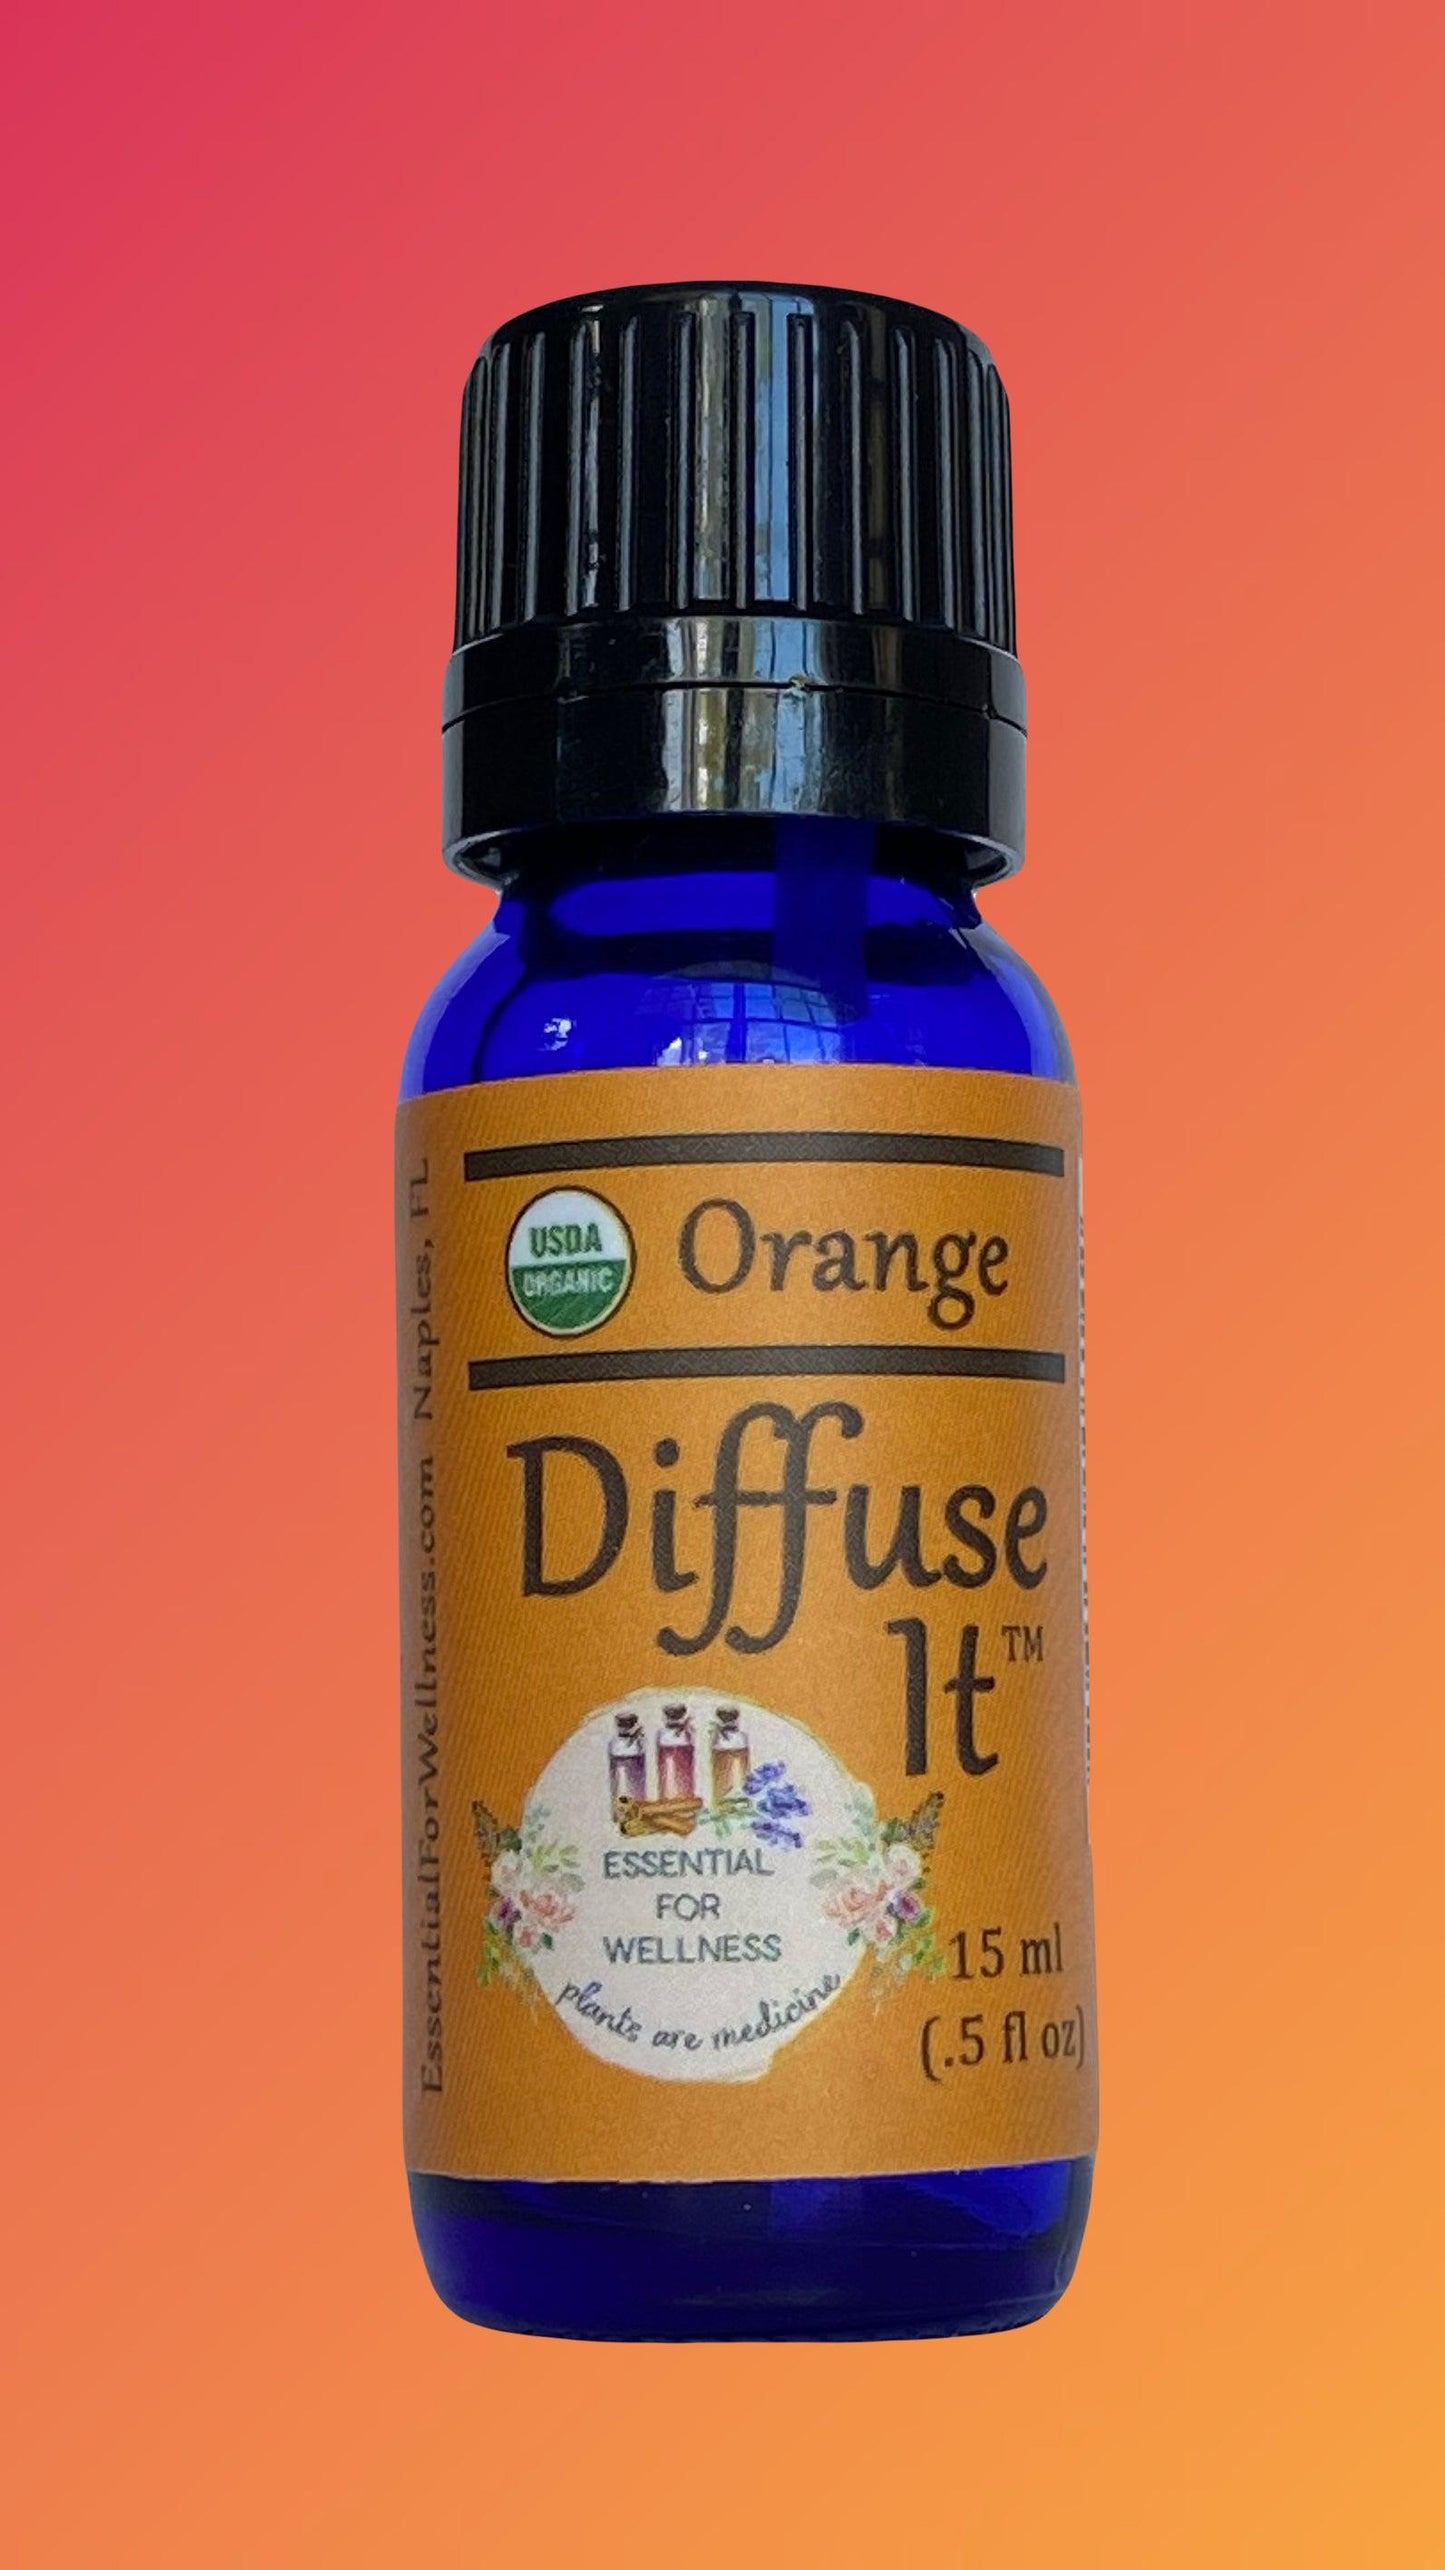 Organic Sweet Orange Essential Oil by Diffuse It™